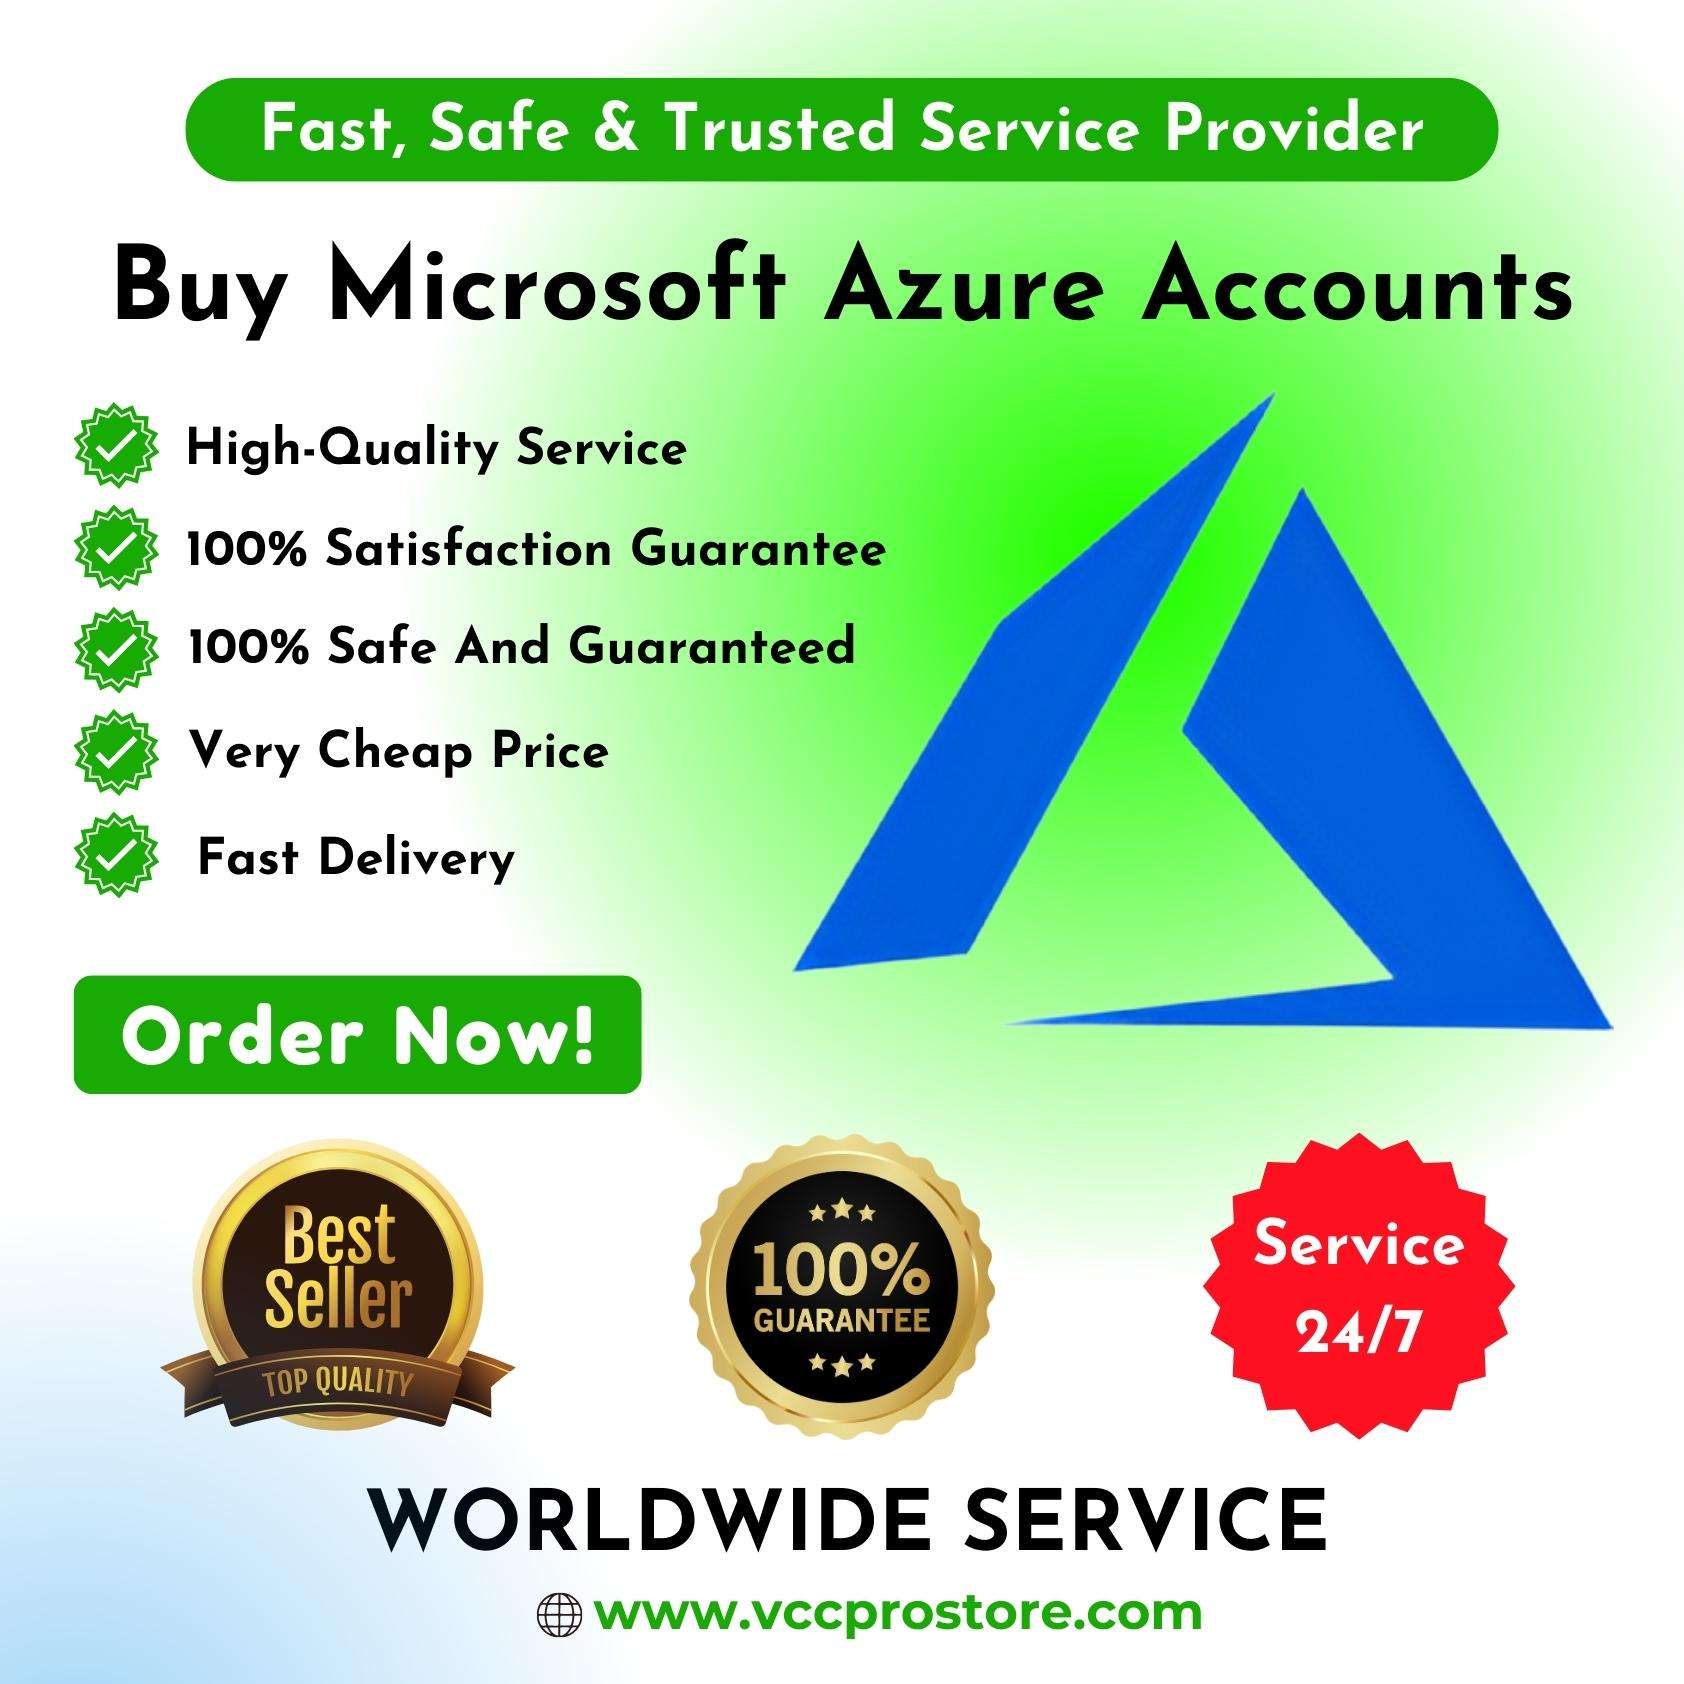 Buy Microsoft Azure Account - Free Trail & Pay as you go